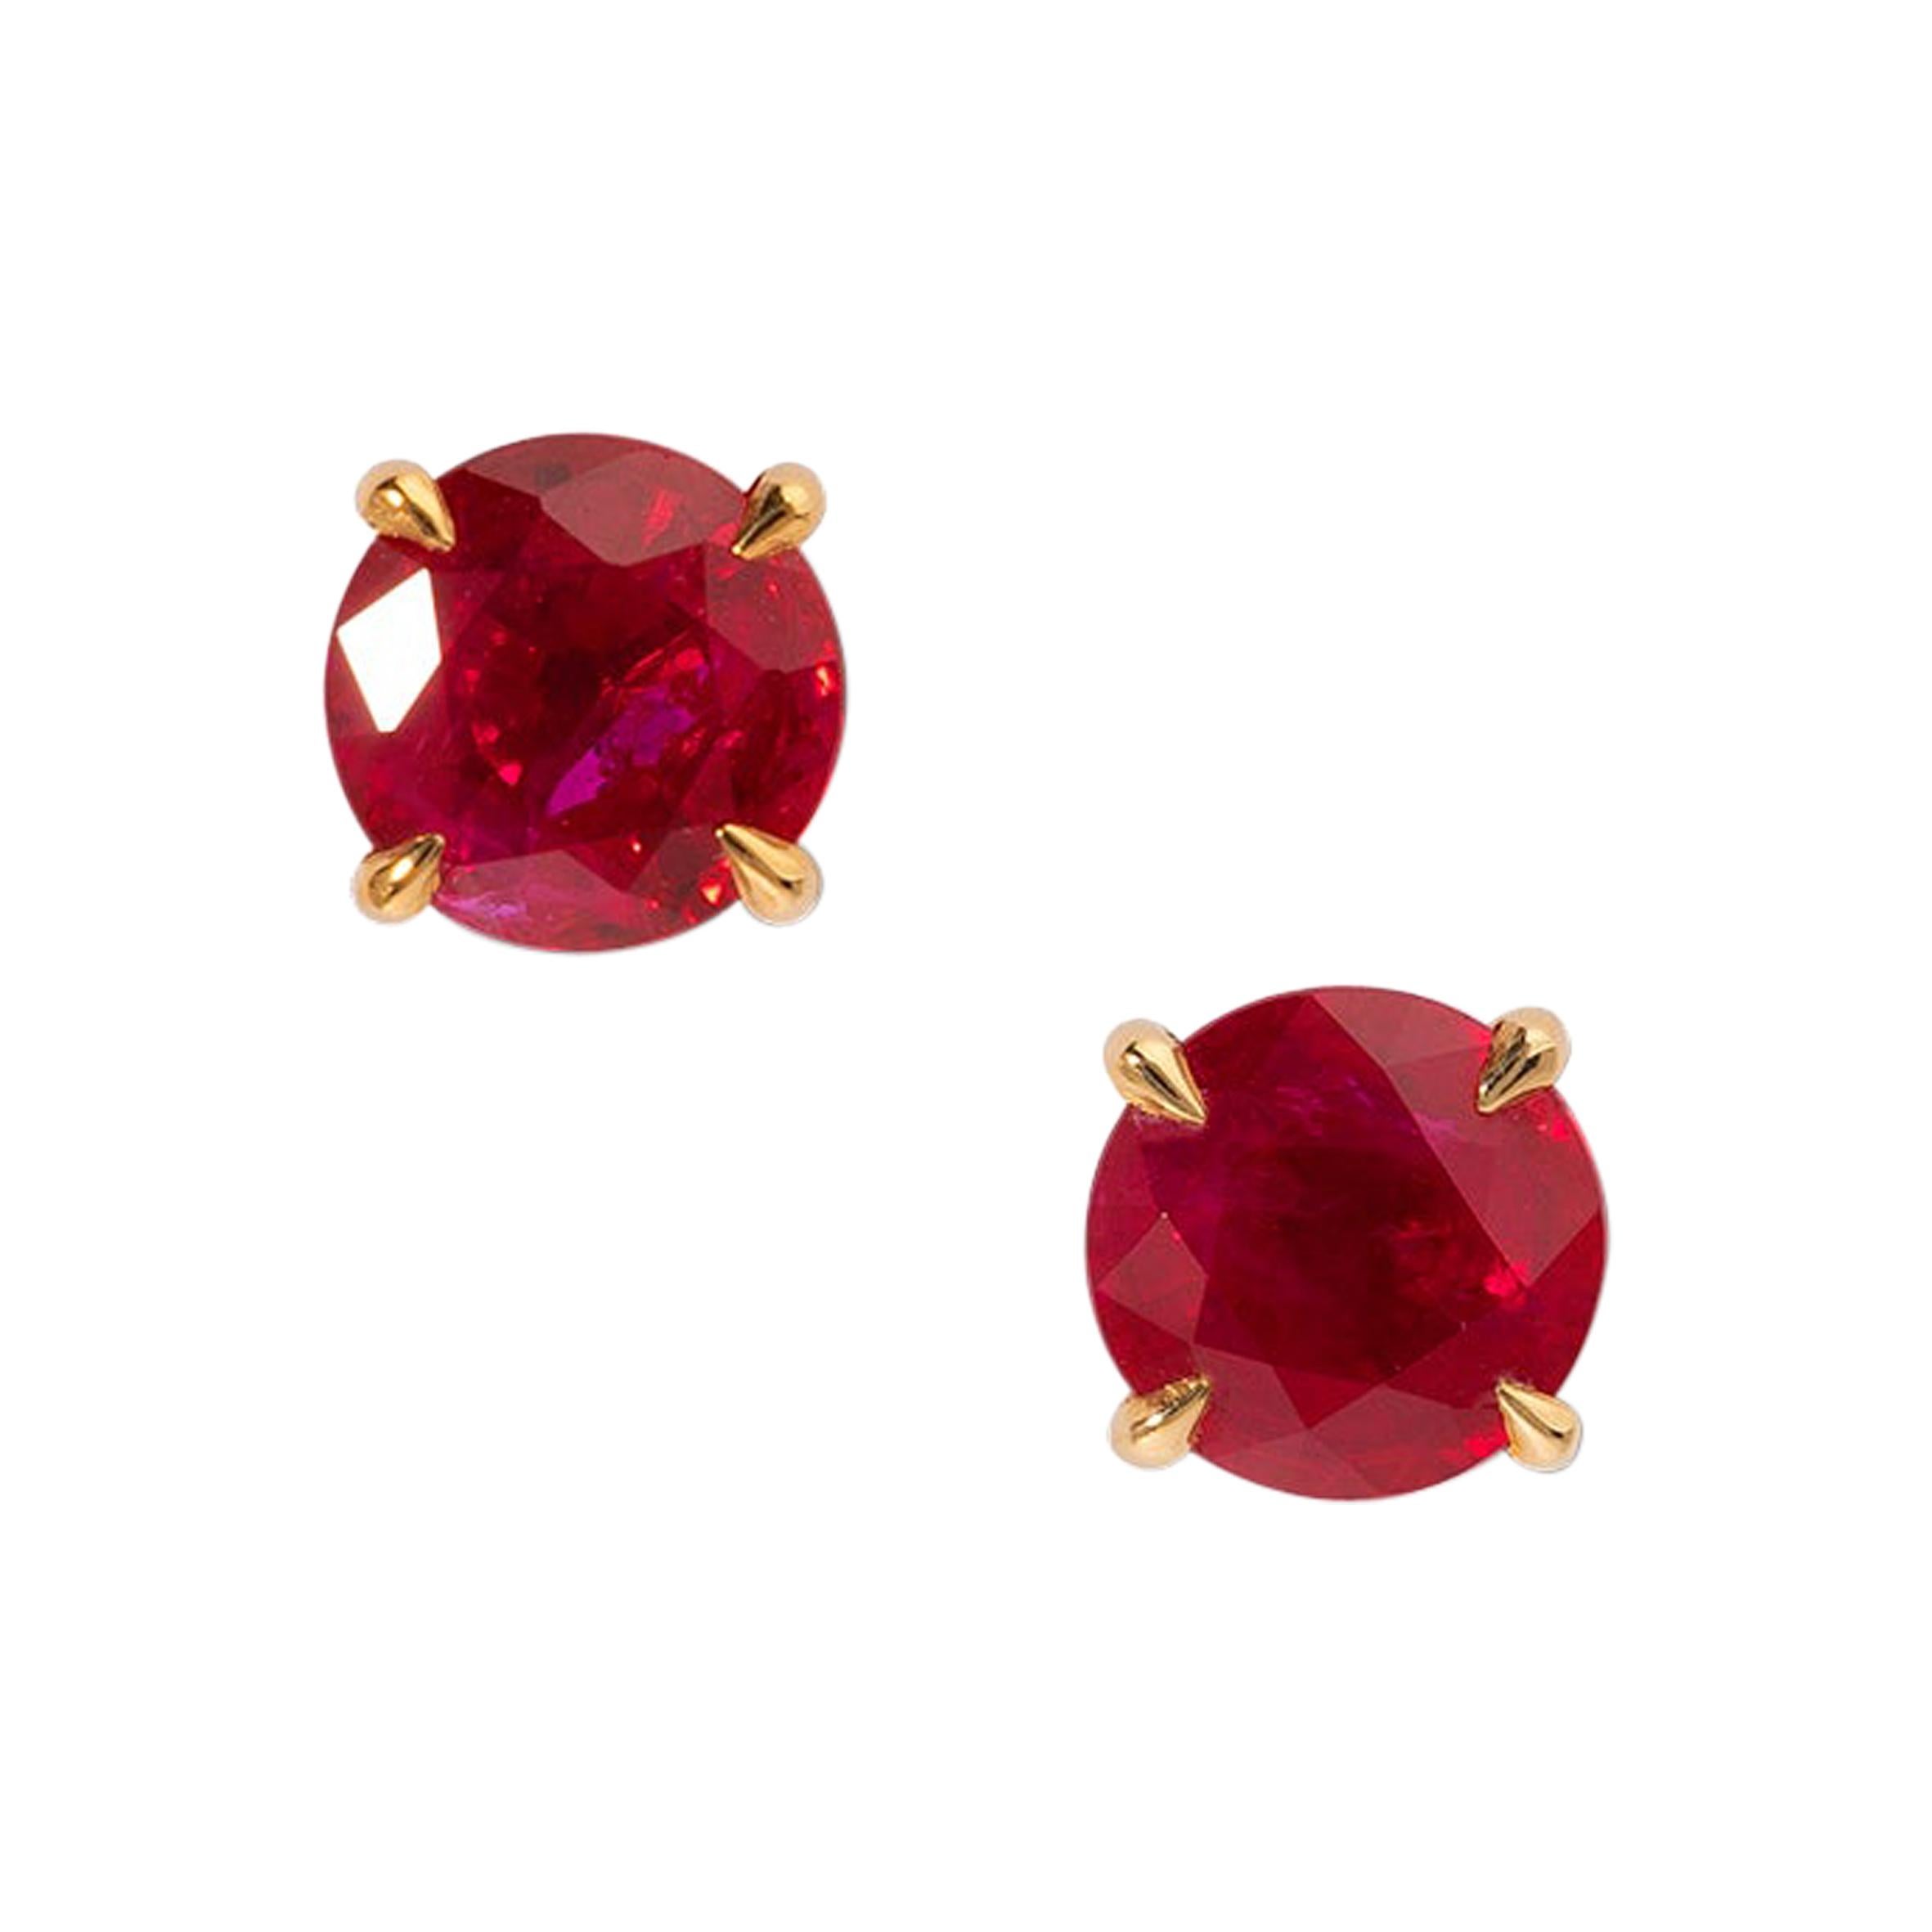 Round Ruby Stud Earrings in 18K Yellow Gold